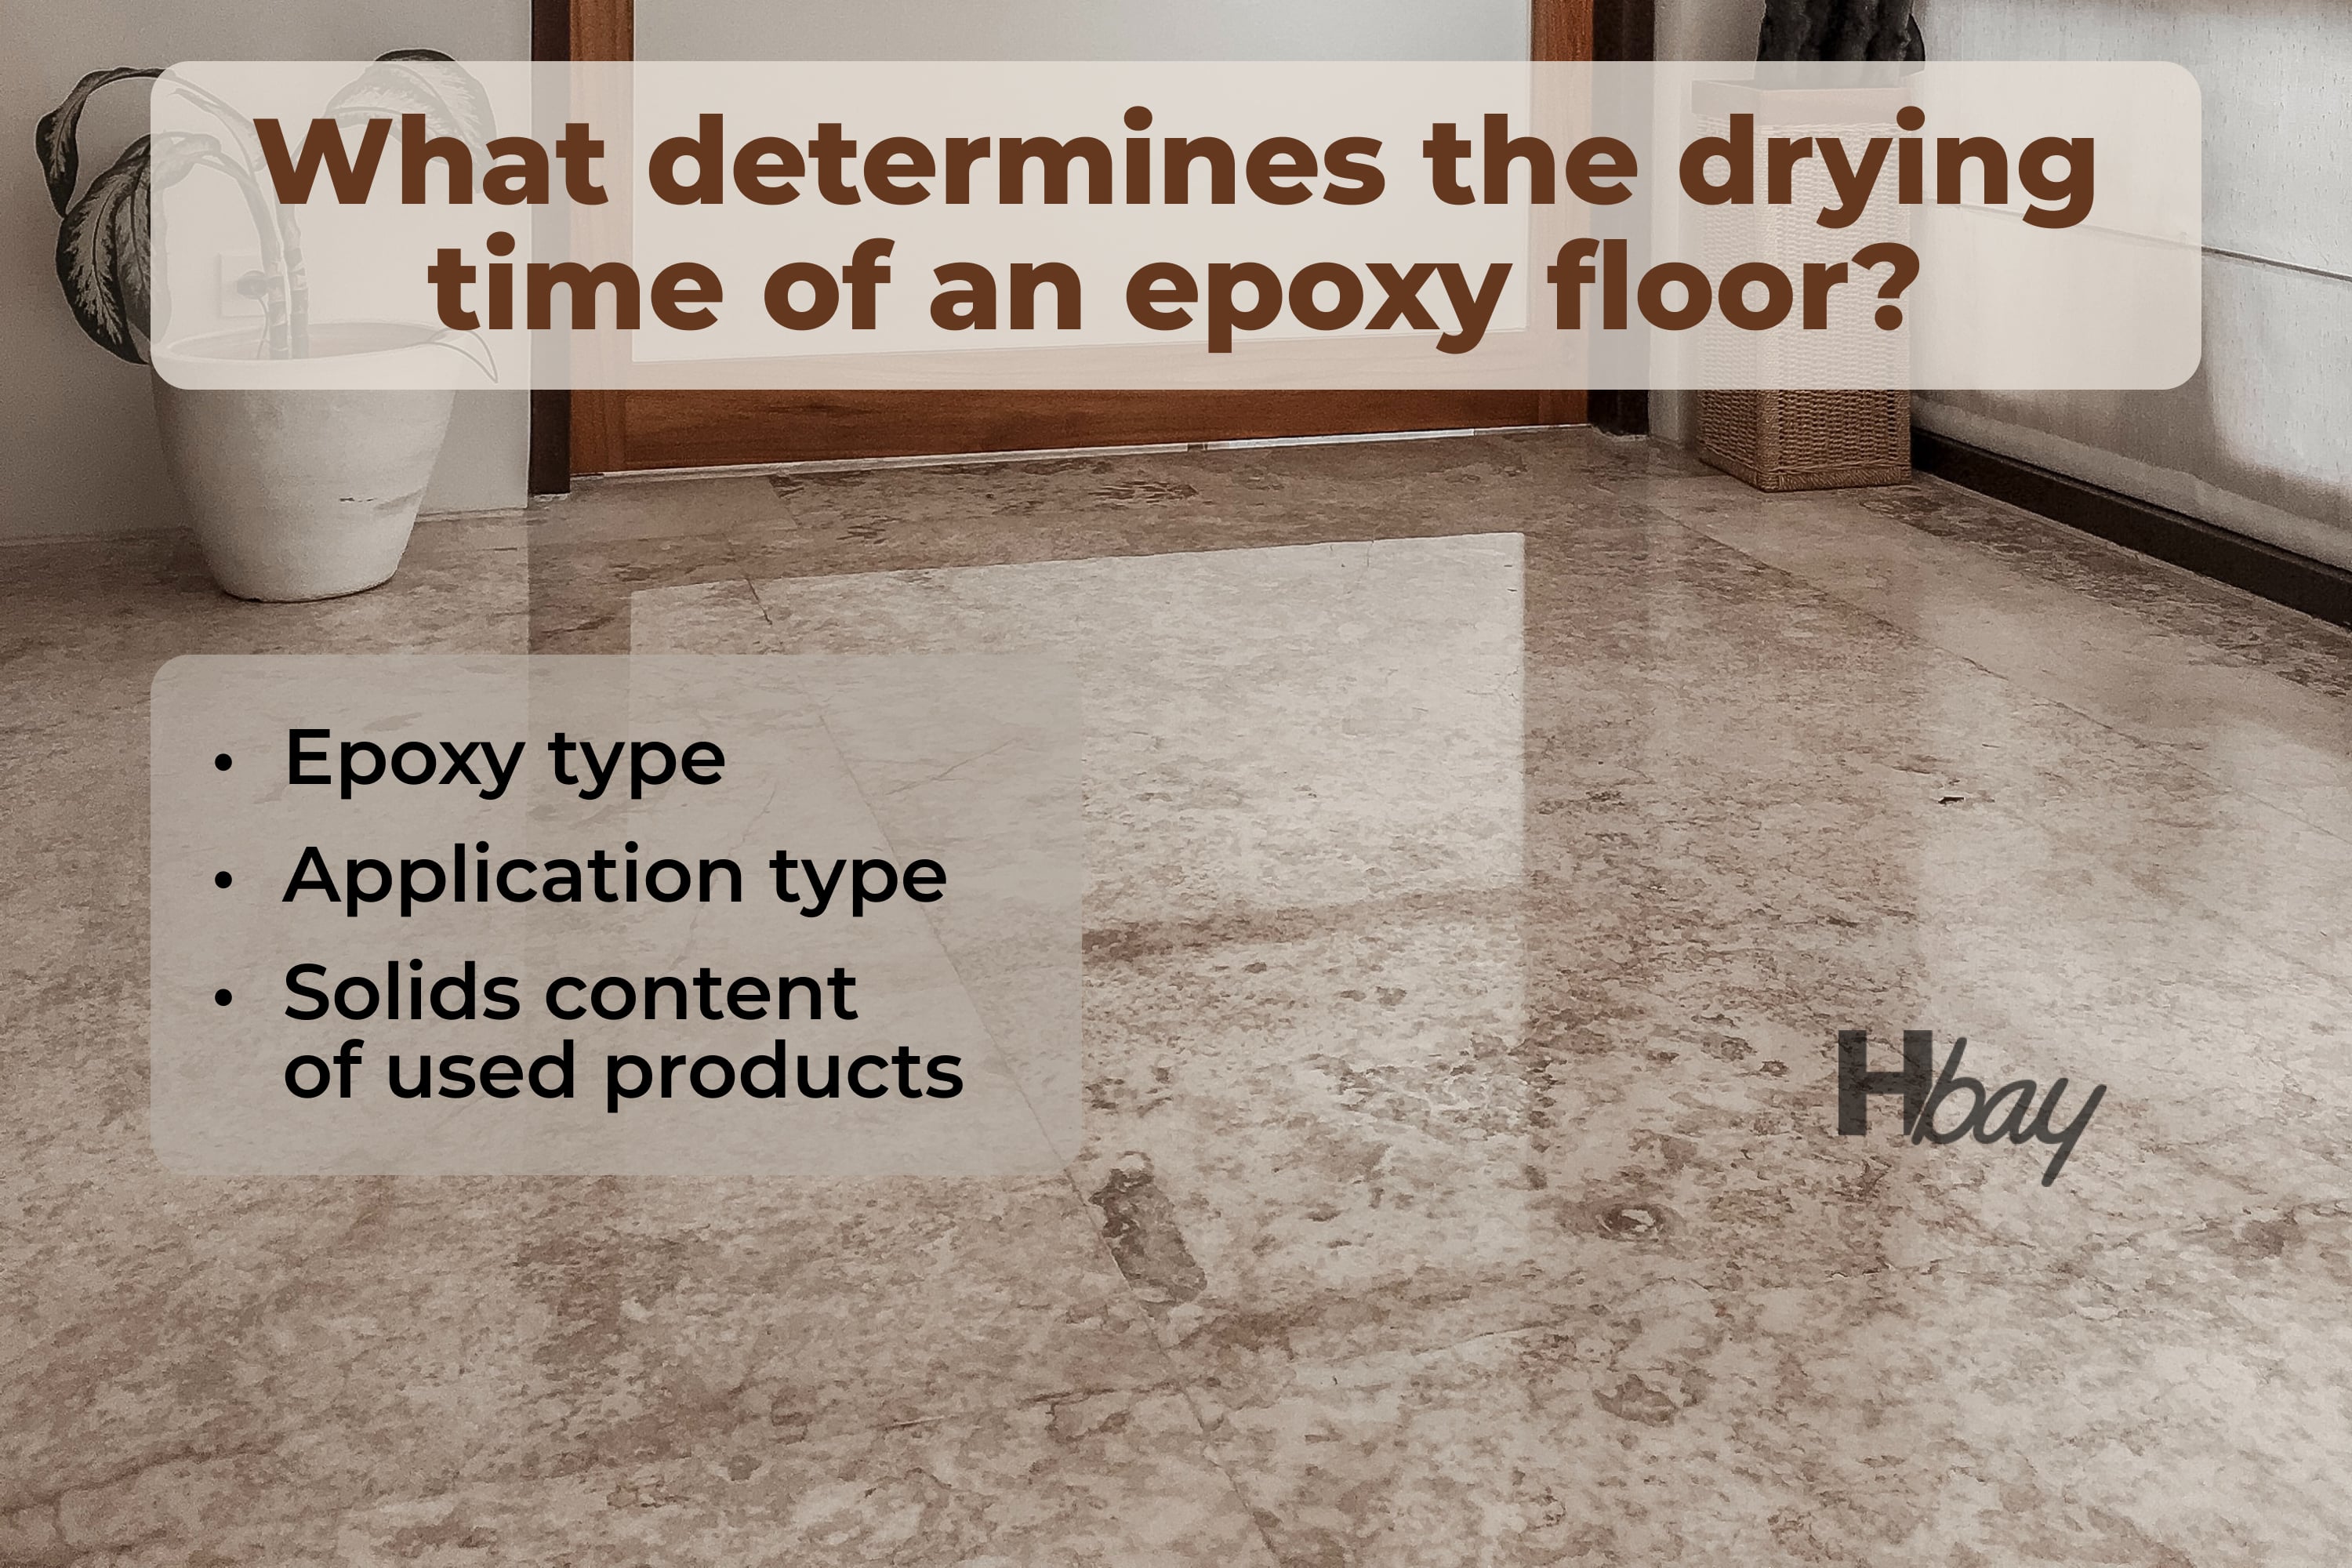 What determines the drying time of an epoxy floor